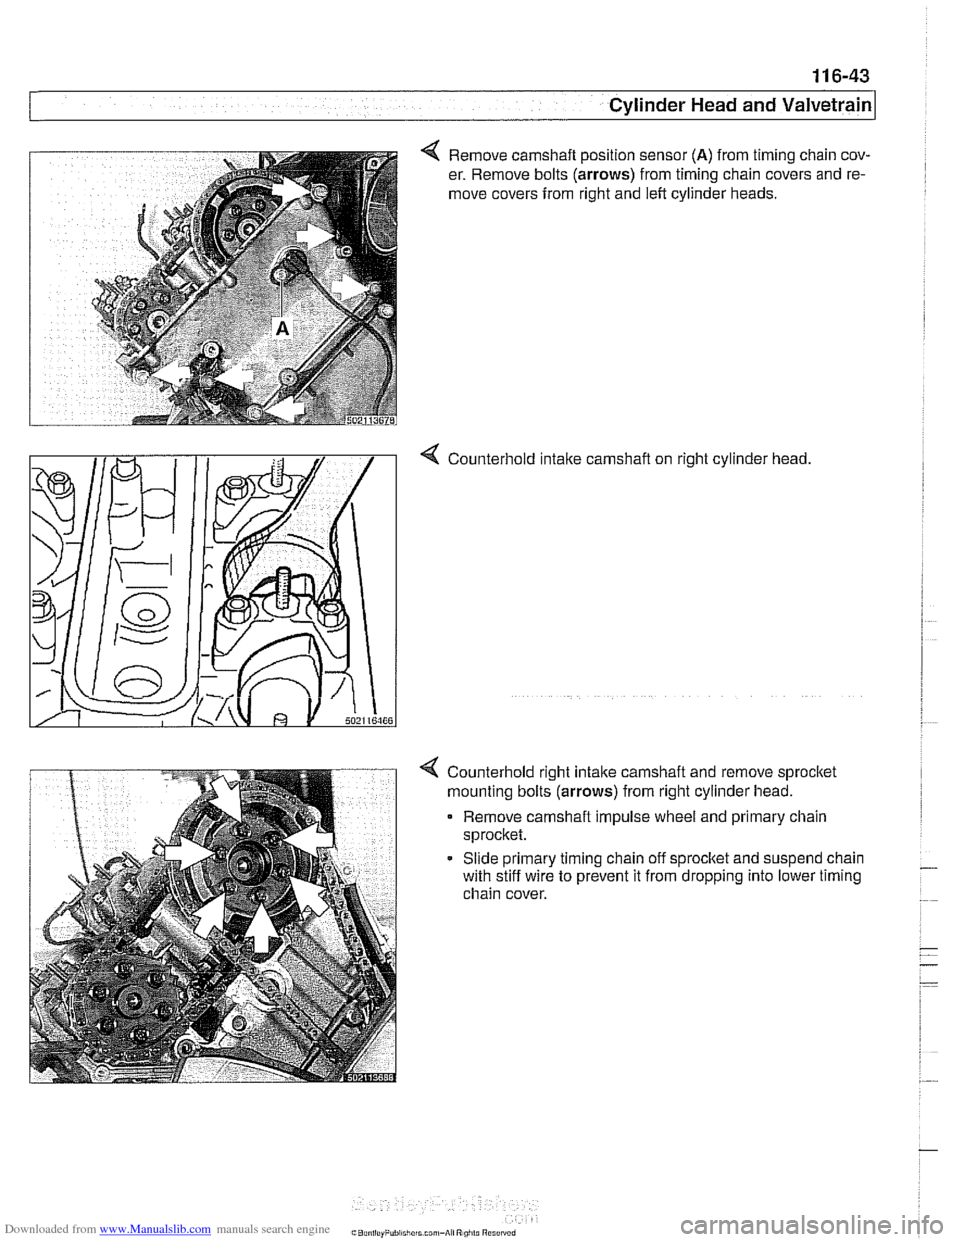 BMW 528i 1999 E39 Workshop Manual Downloaded from www.Manualslib.com manuals search engine 
Cylinder Head and valvetrain1 
4 Remove camshaft position sensor (A) from timing chain cov- 
er.  Remove bolts 
(arrows) from timing chain cov